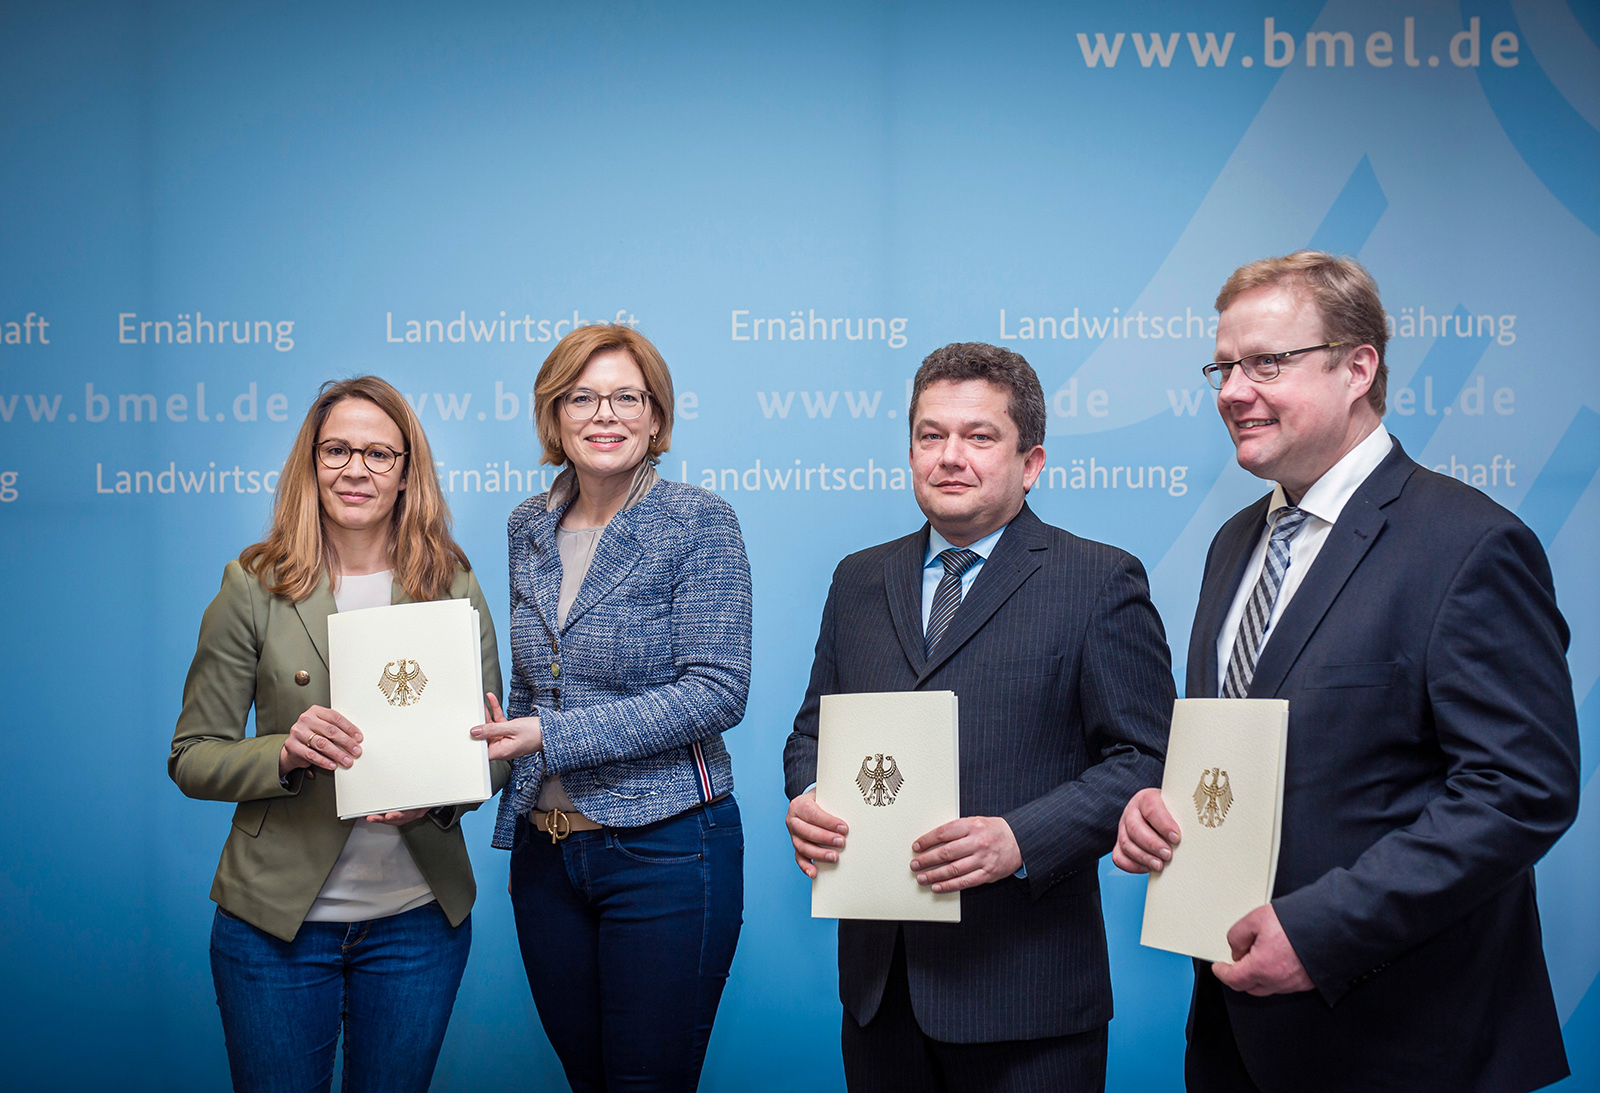 On March 9, 2020, Prof. Andreas Wenzel from Fraunhofer IOSB-AST (3rd from left) next to Minister Julia Klöckner (2nd from left) received the funding notification for the digital experimental fields in agri-culture in Berlin.